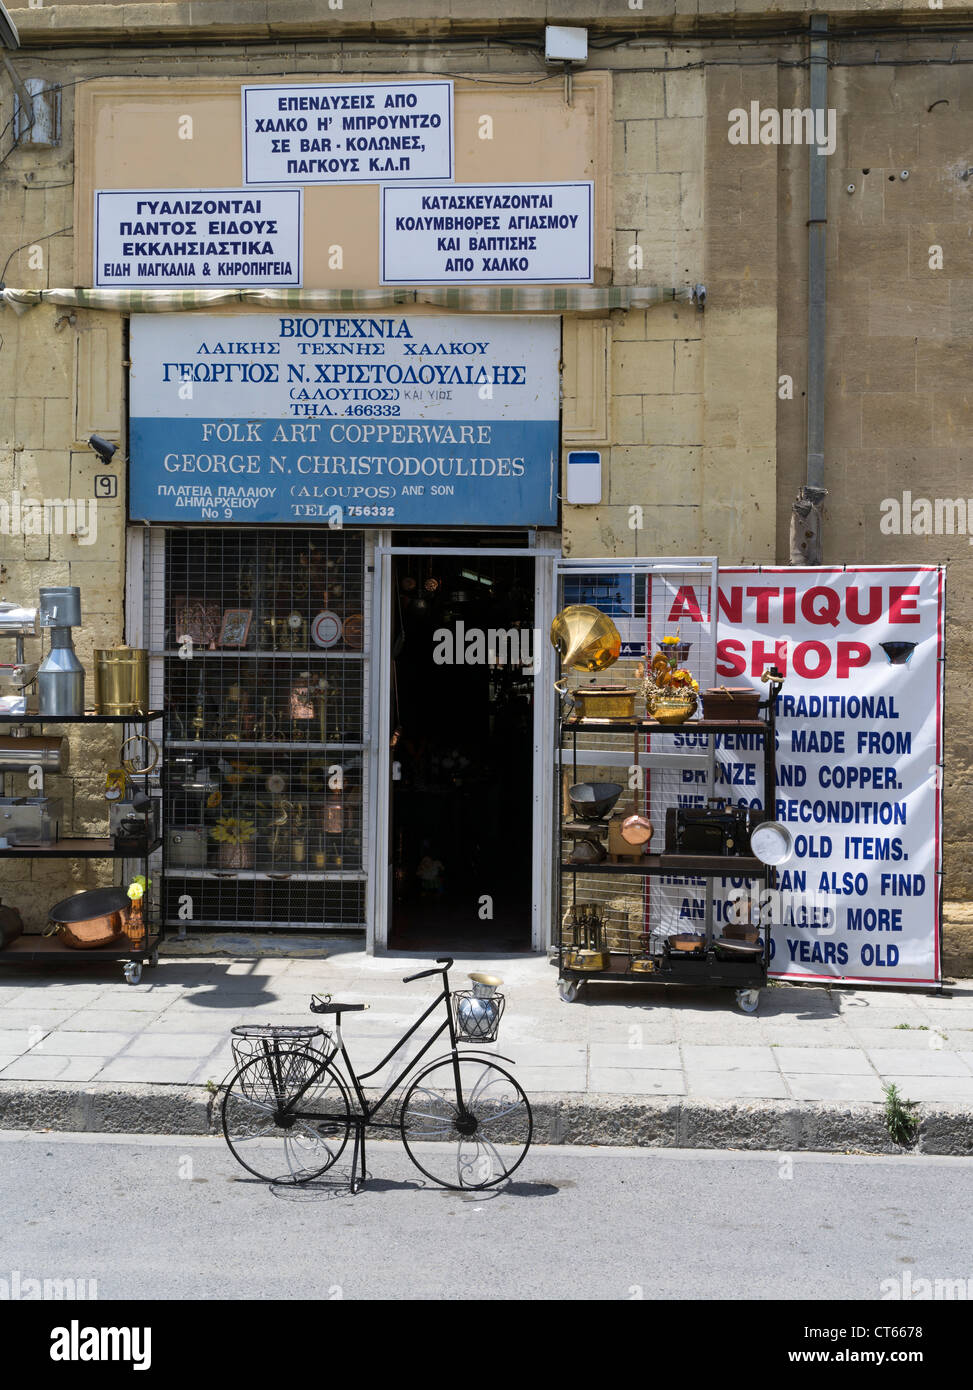 dh Old town Cypriot antique shop NICOSIA SOUTH CYPRUS Lefkosia shopping greek shops front Stock Photo